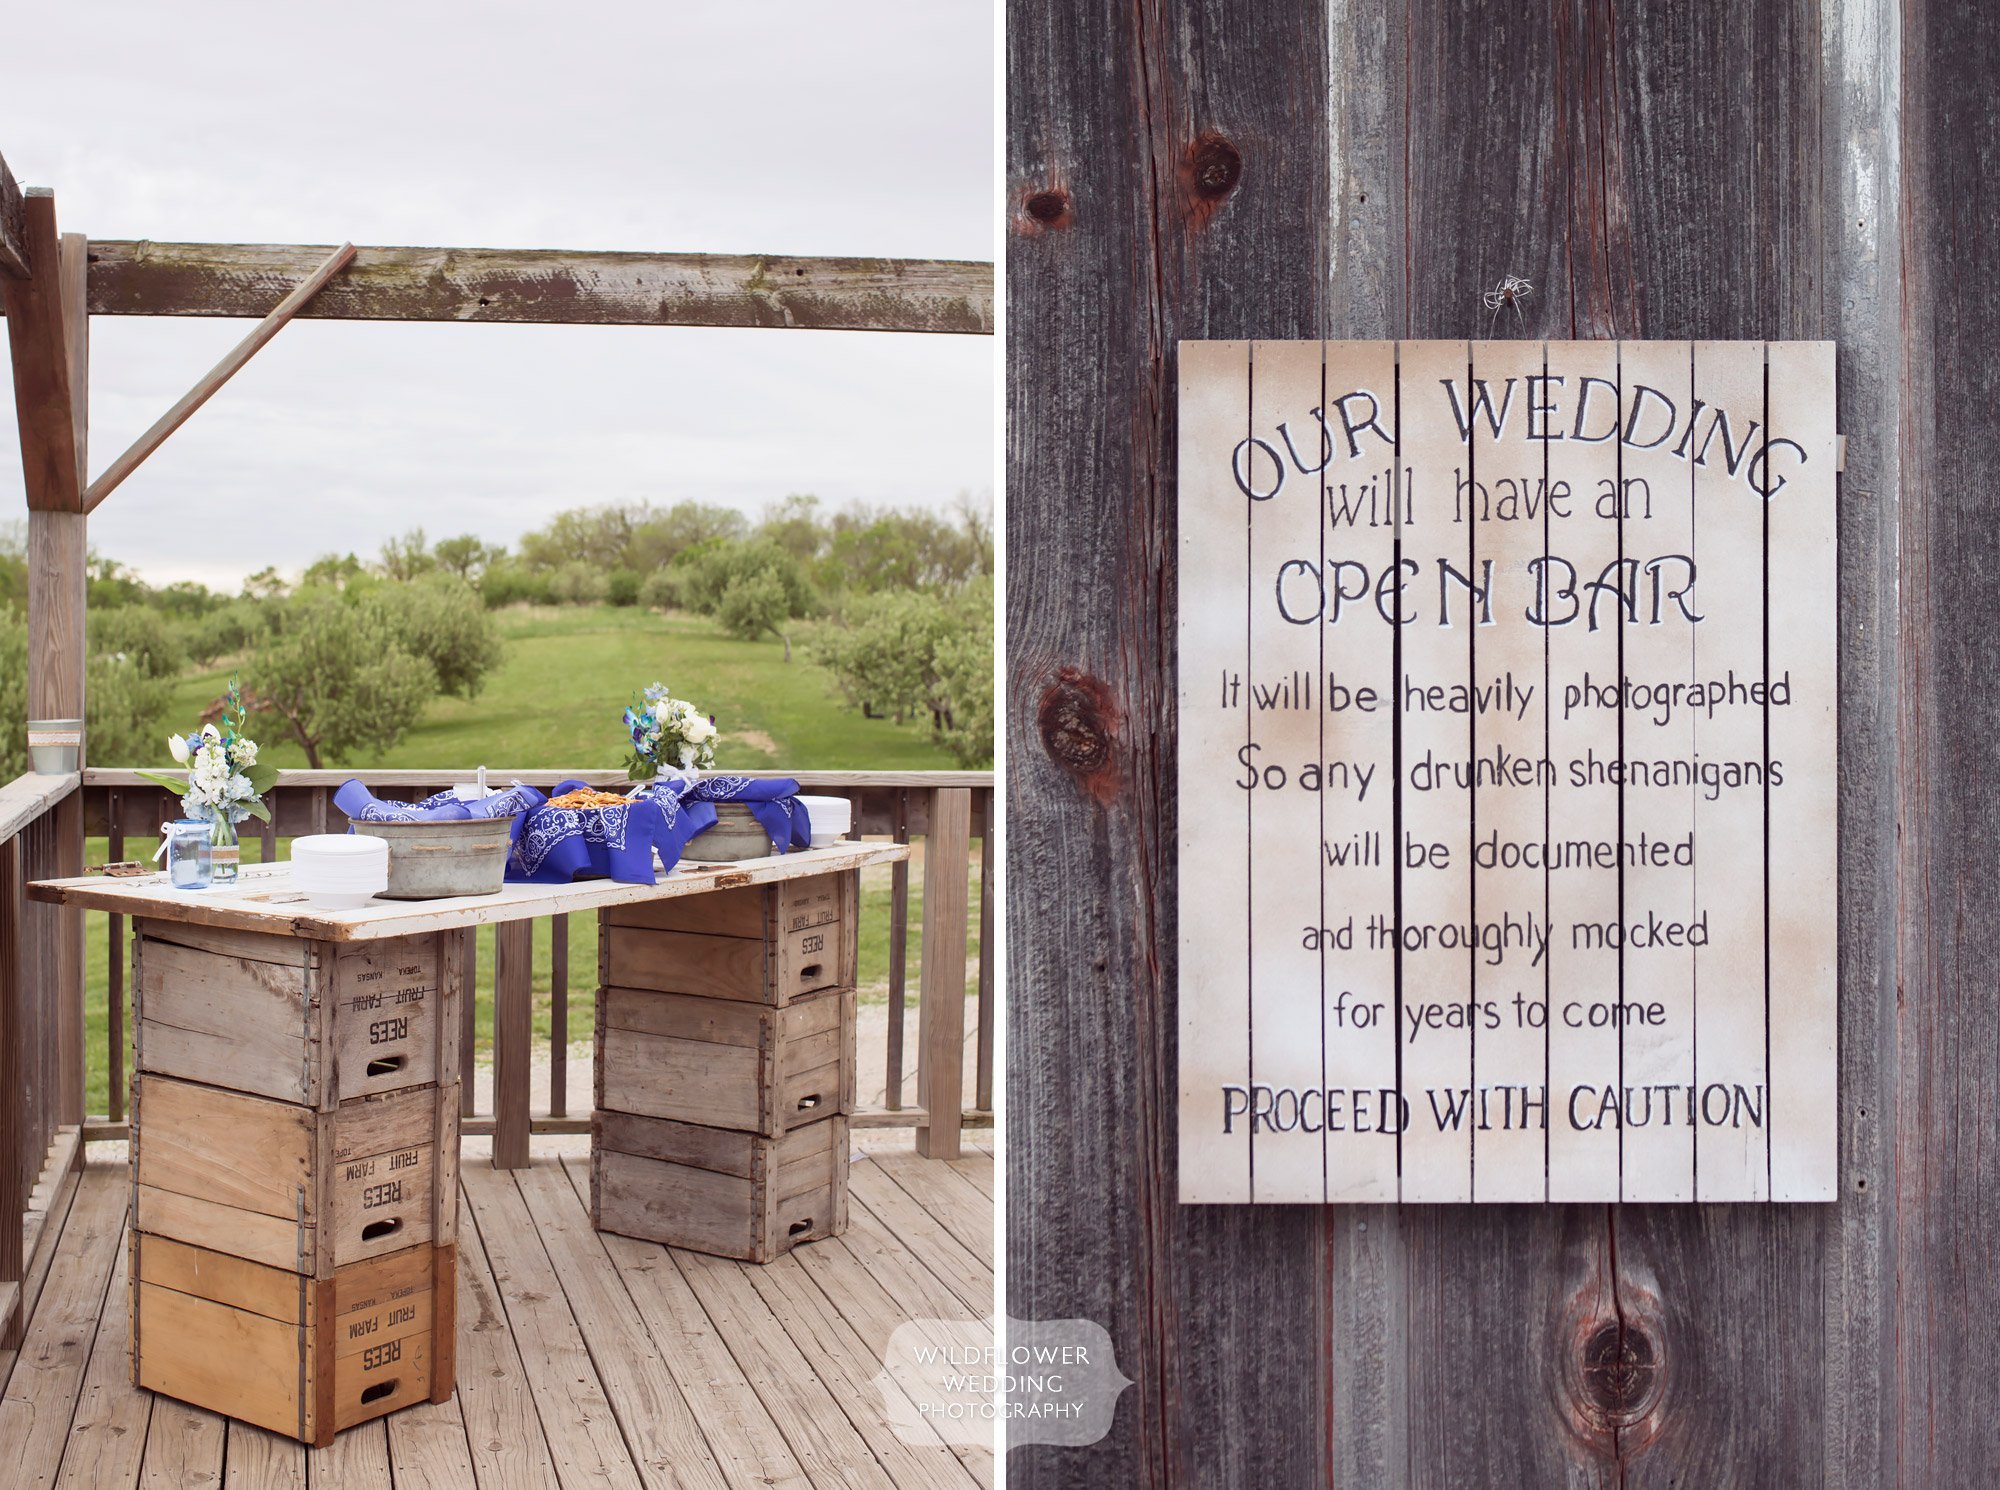 Country wedding decor ideas with an outdoor bar made of wooden crates and a handmade funny wood sign.